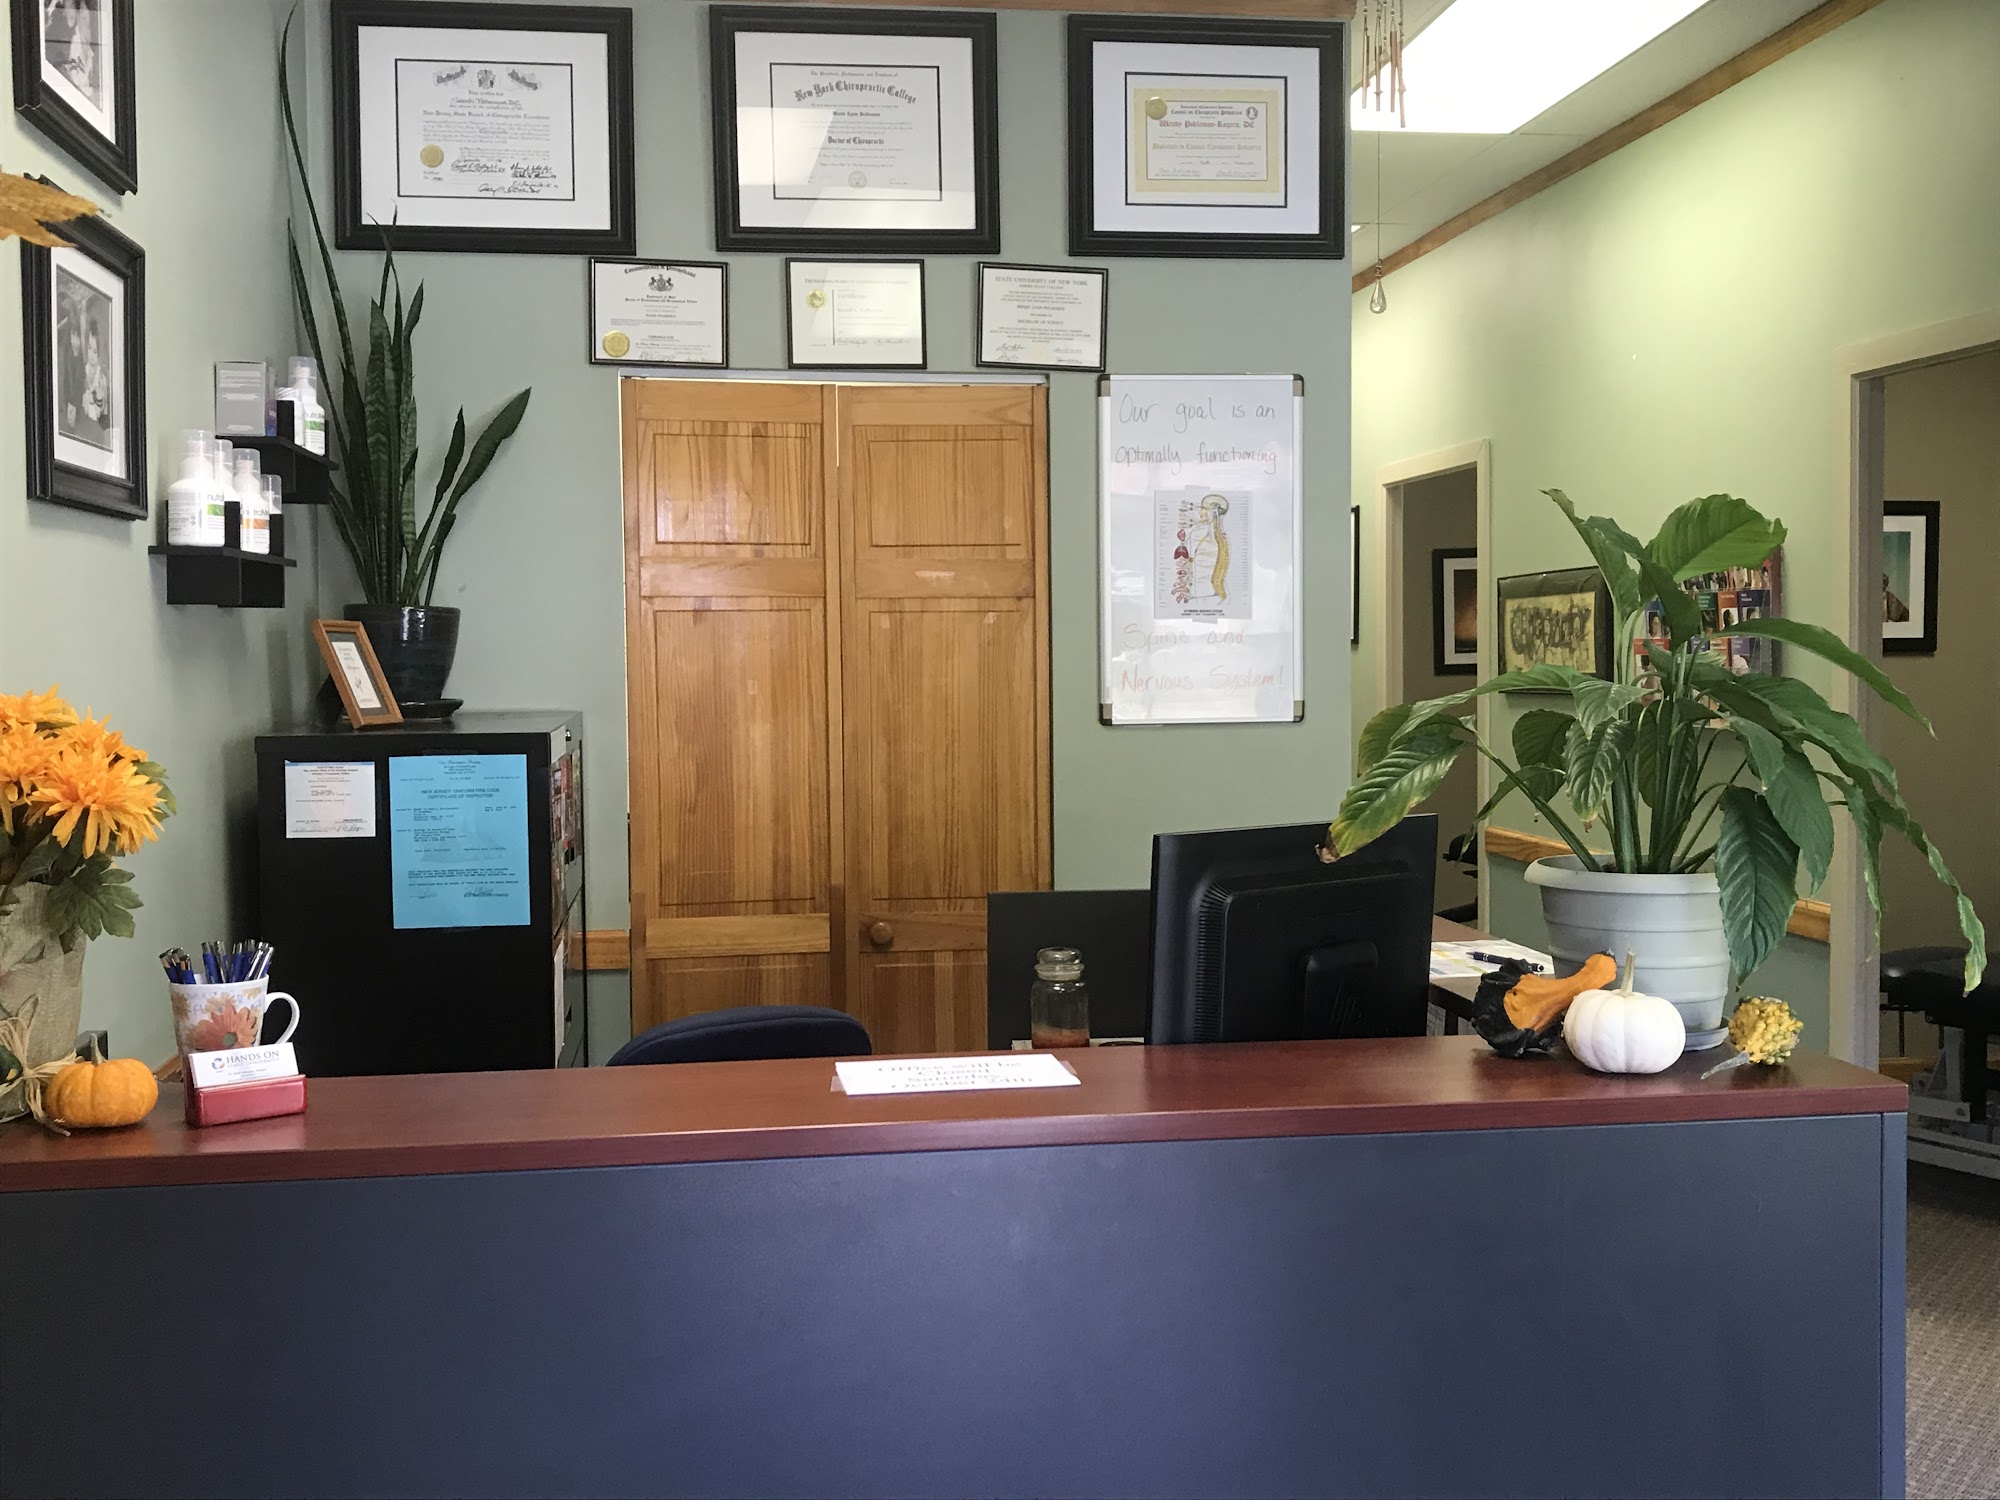 Hands On Family Chiropractic 21 Broadway Ste E, Woodcliff Lake New Jersey 07677